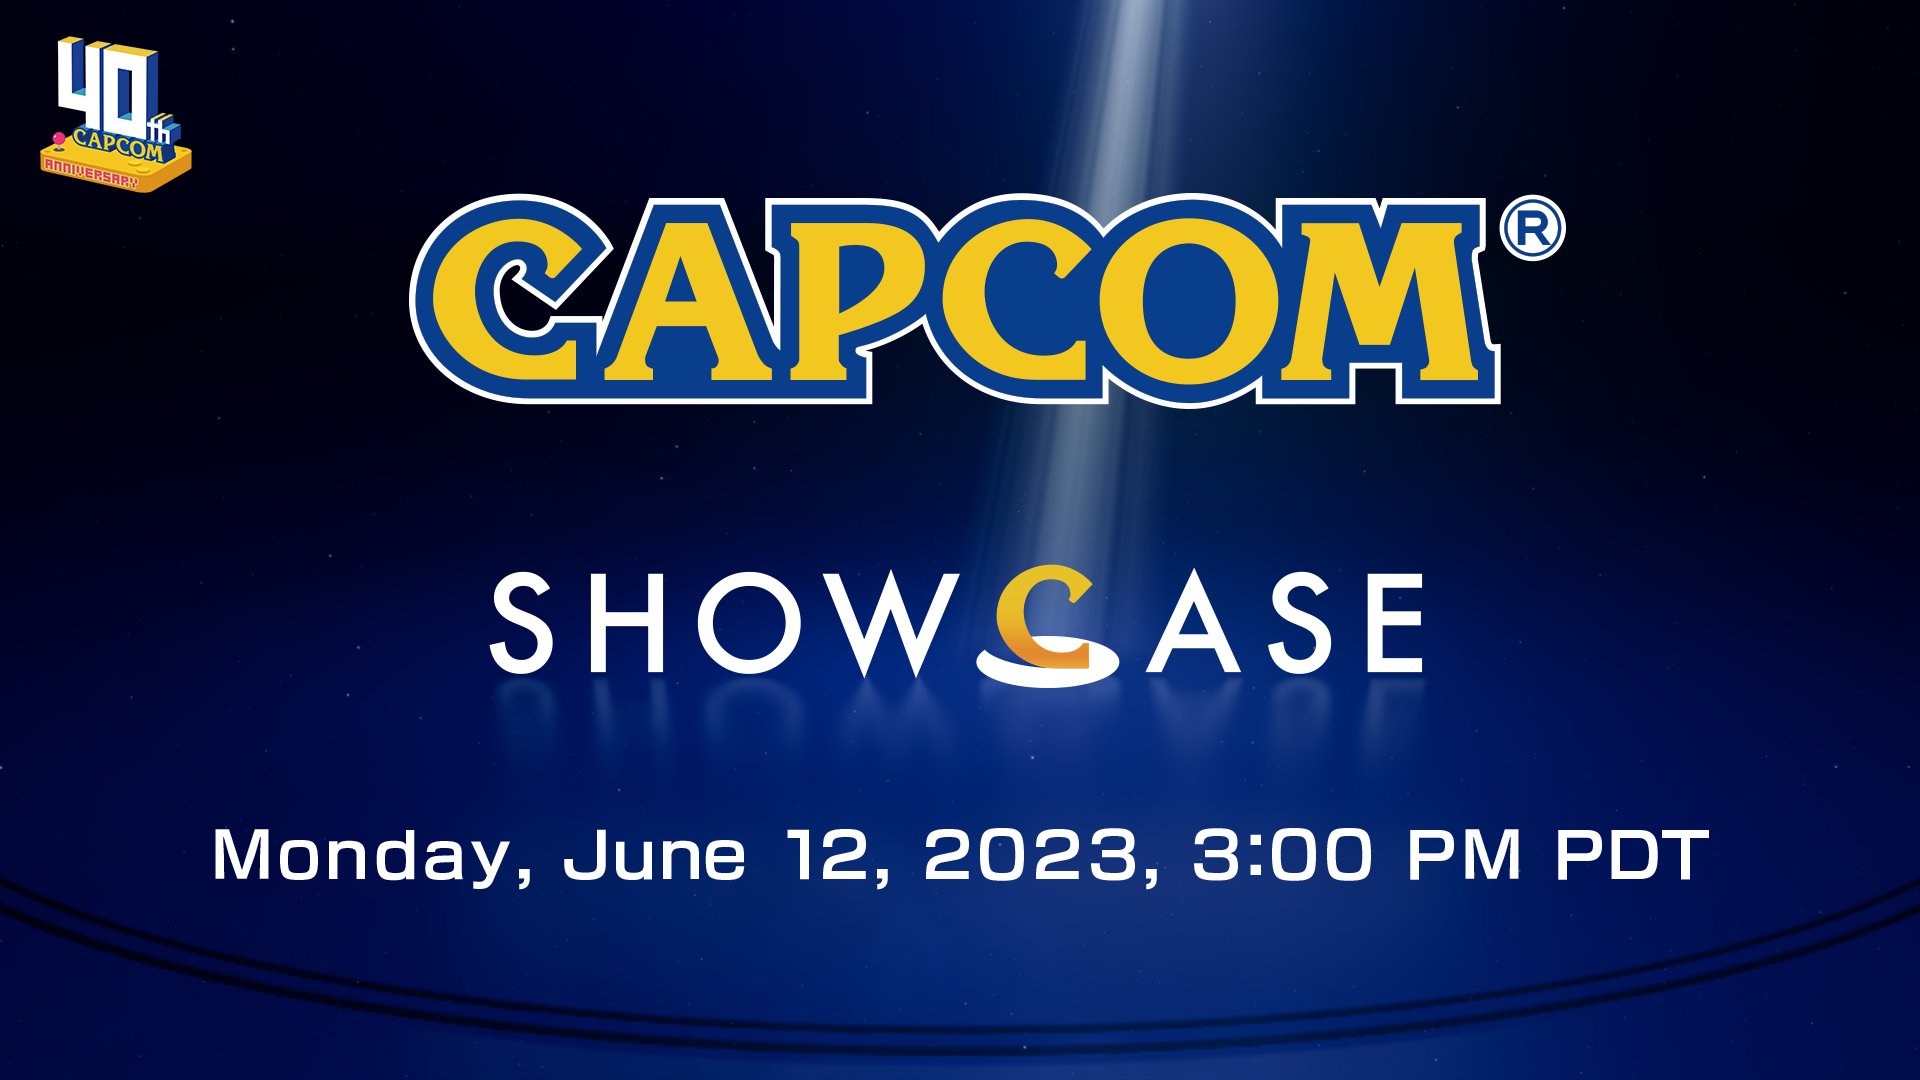 Capcom Showcase Will Run for Roughly 36 Minutes, Featuring Updates on Latest Titles